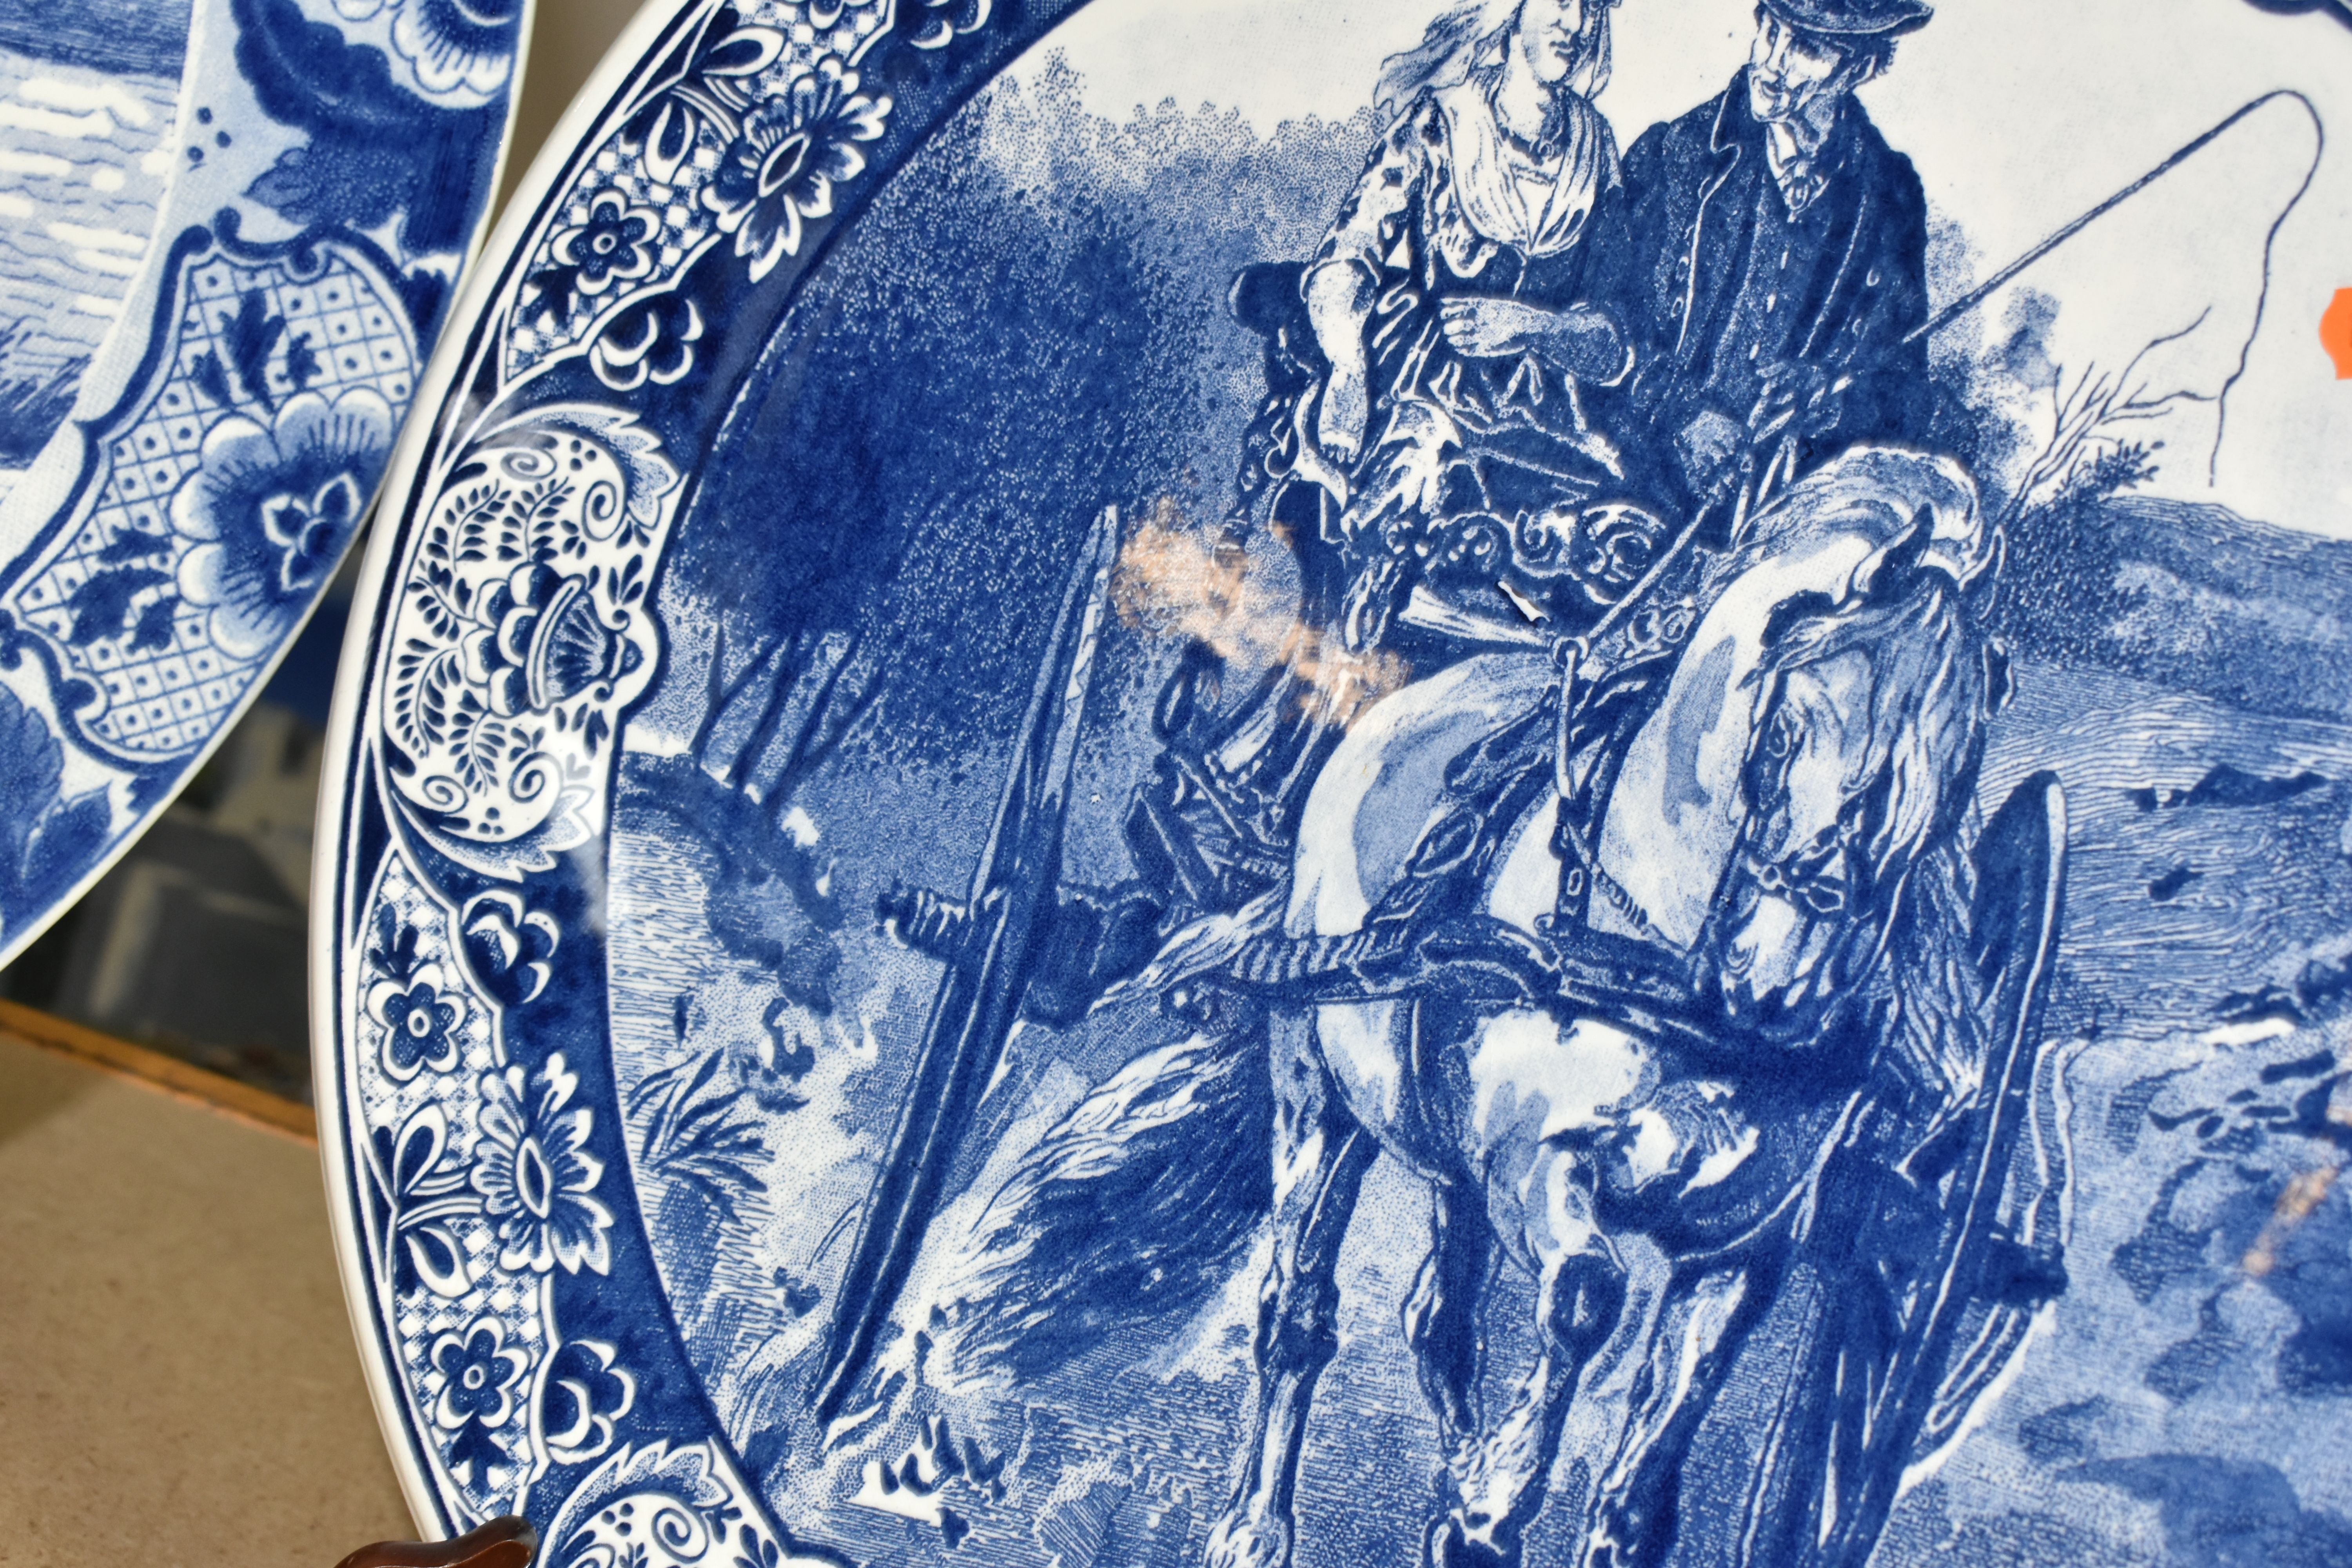 TWO DELFT CHARGERS, blue and white with blue printed Delft mark to the base, depicting a carriage - Image 4 of 5